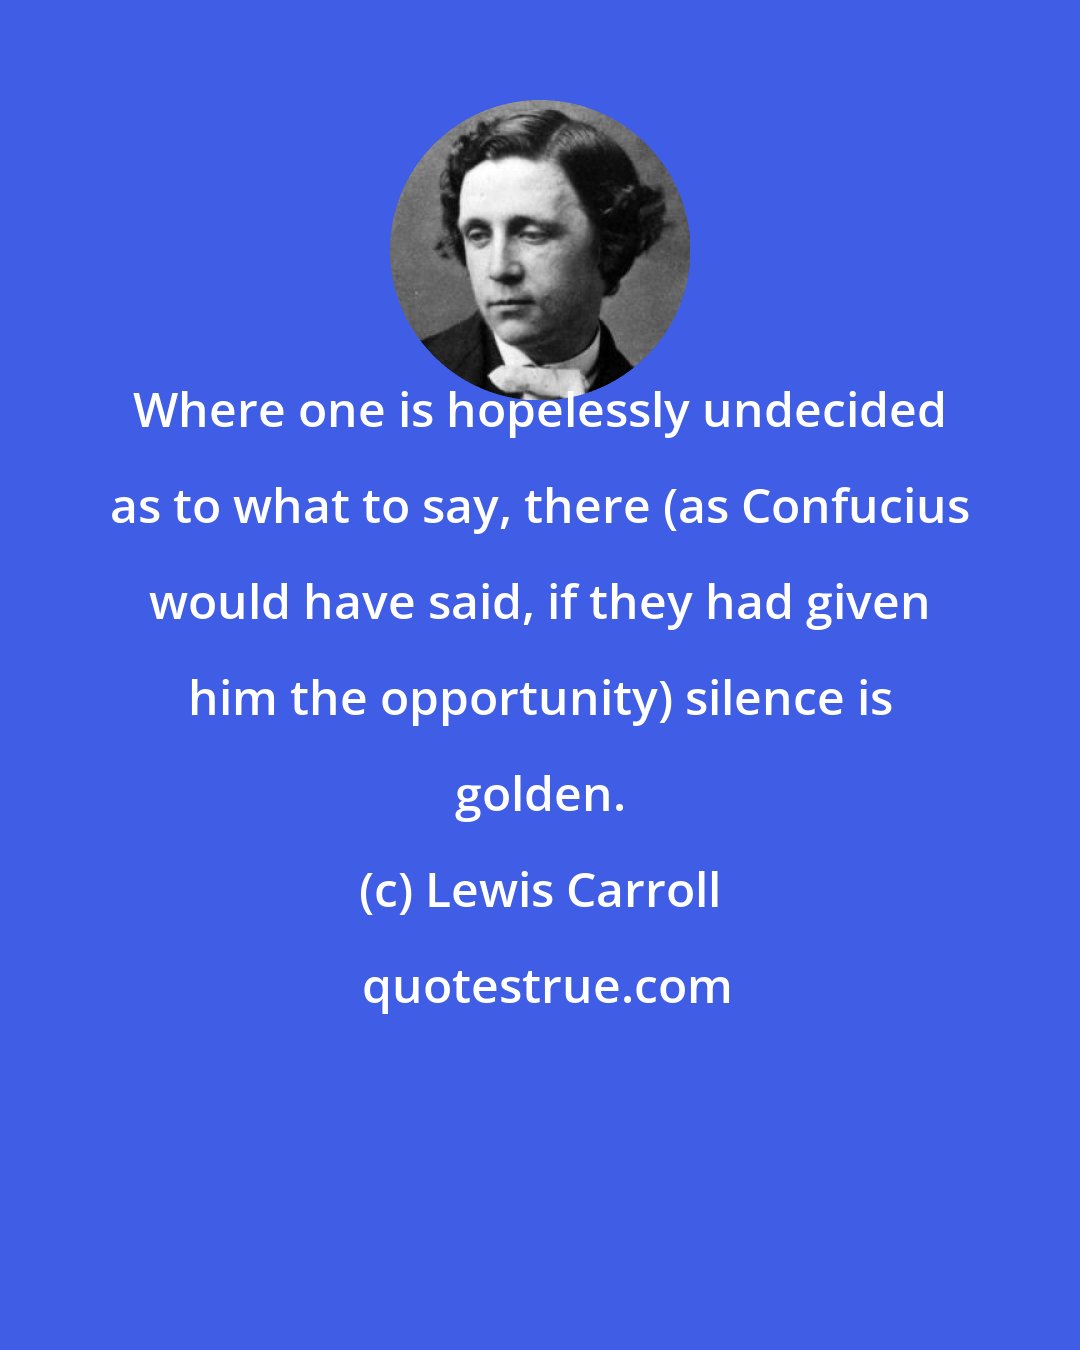 Lewis Carroll: Where one is hopelessly undecided as to what to say, there (as Confucius would have said, if they had given him the opportunity) silence is golden.